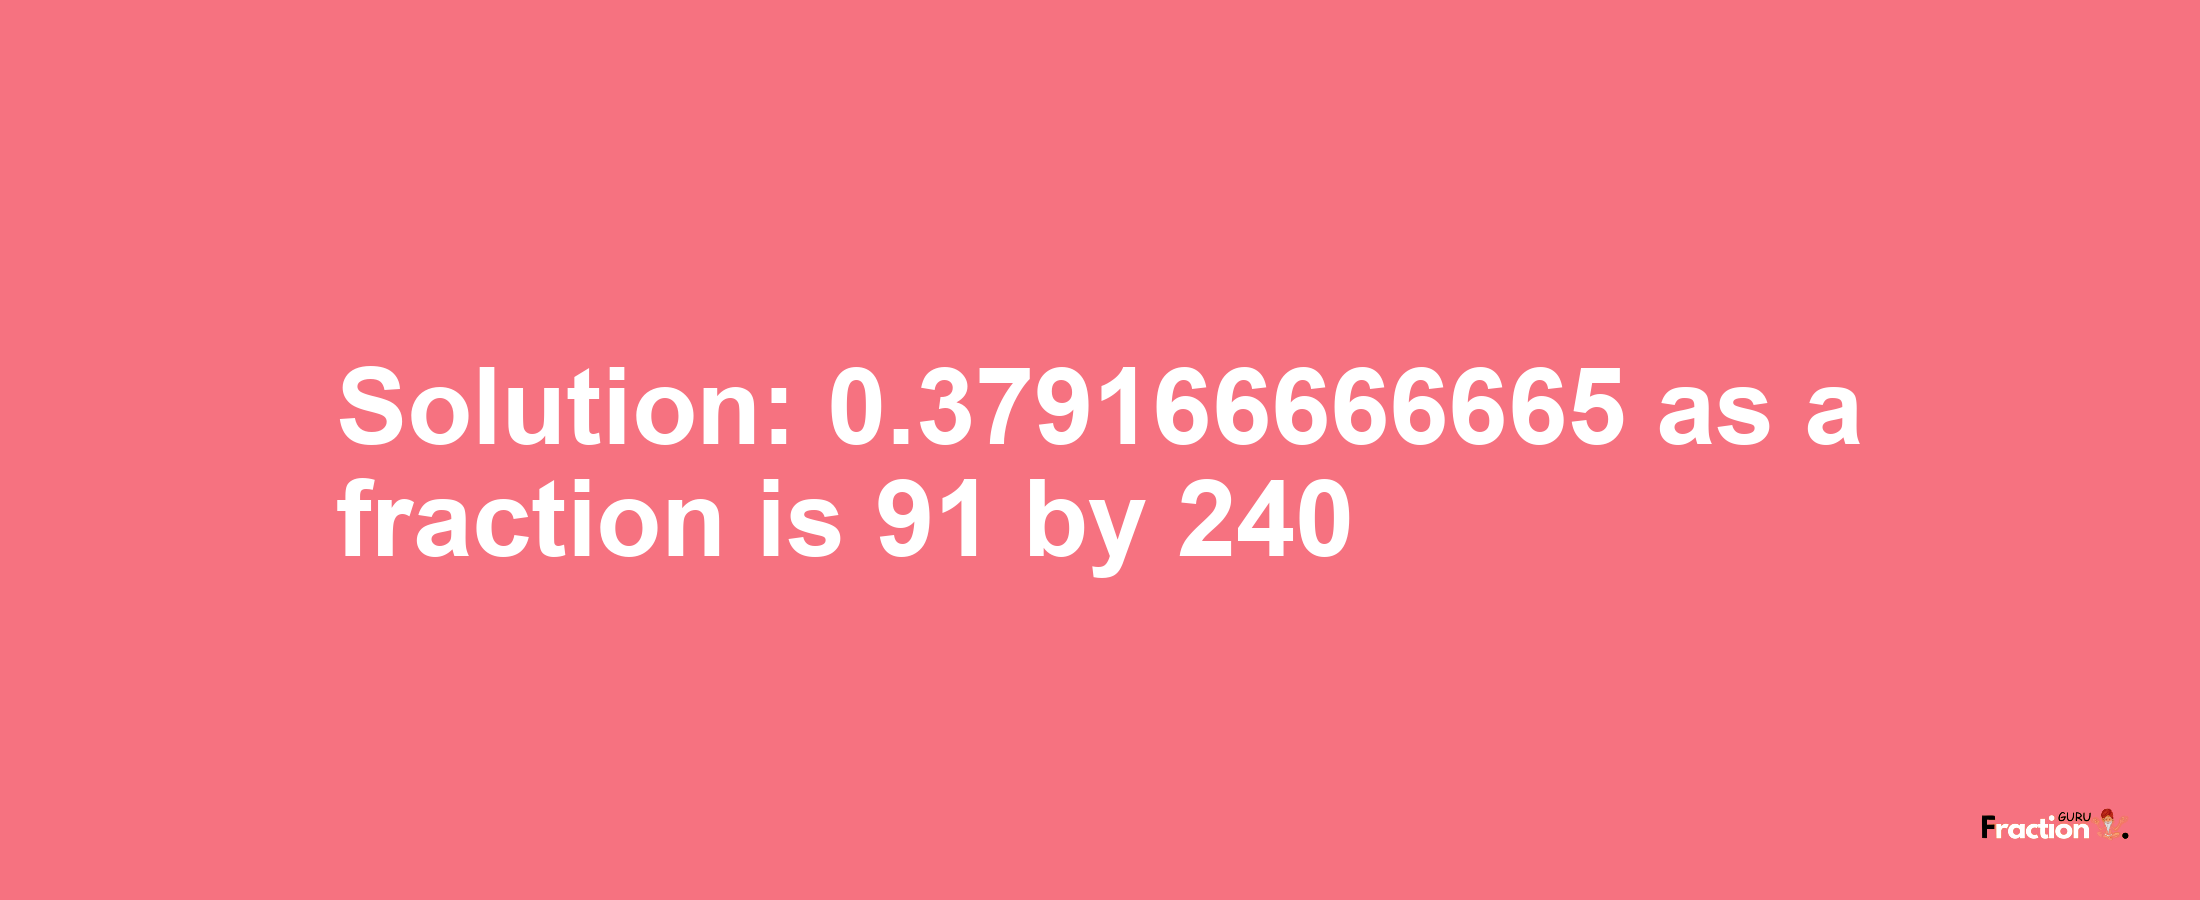 Solution:0.379166666665 as a fraction is 91/240